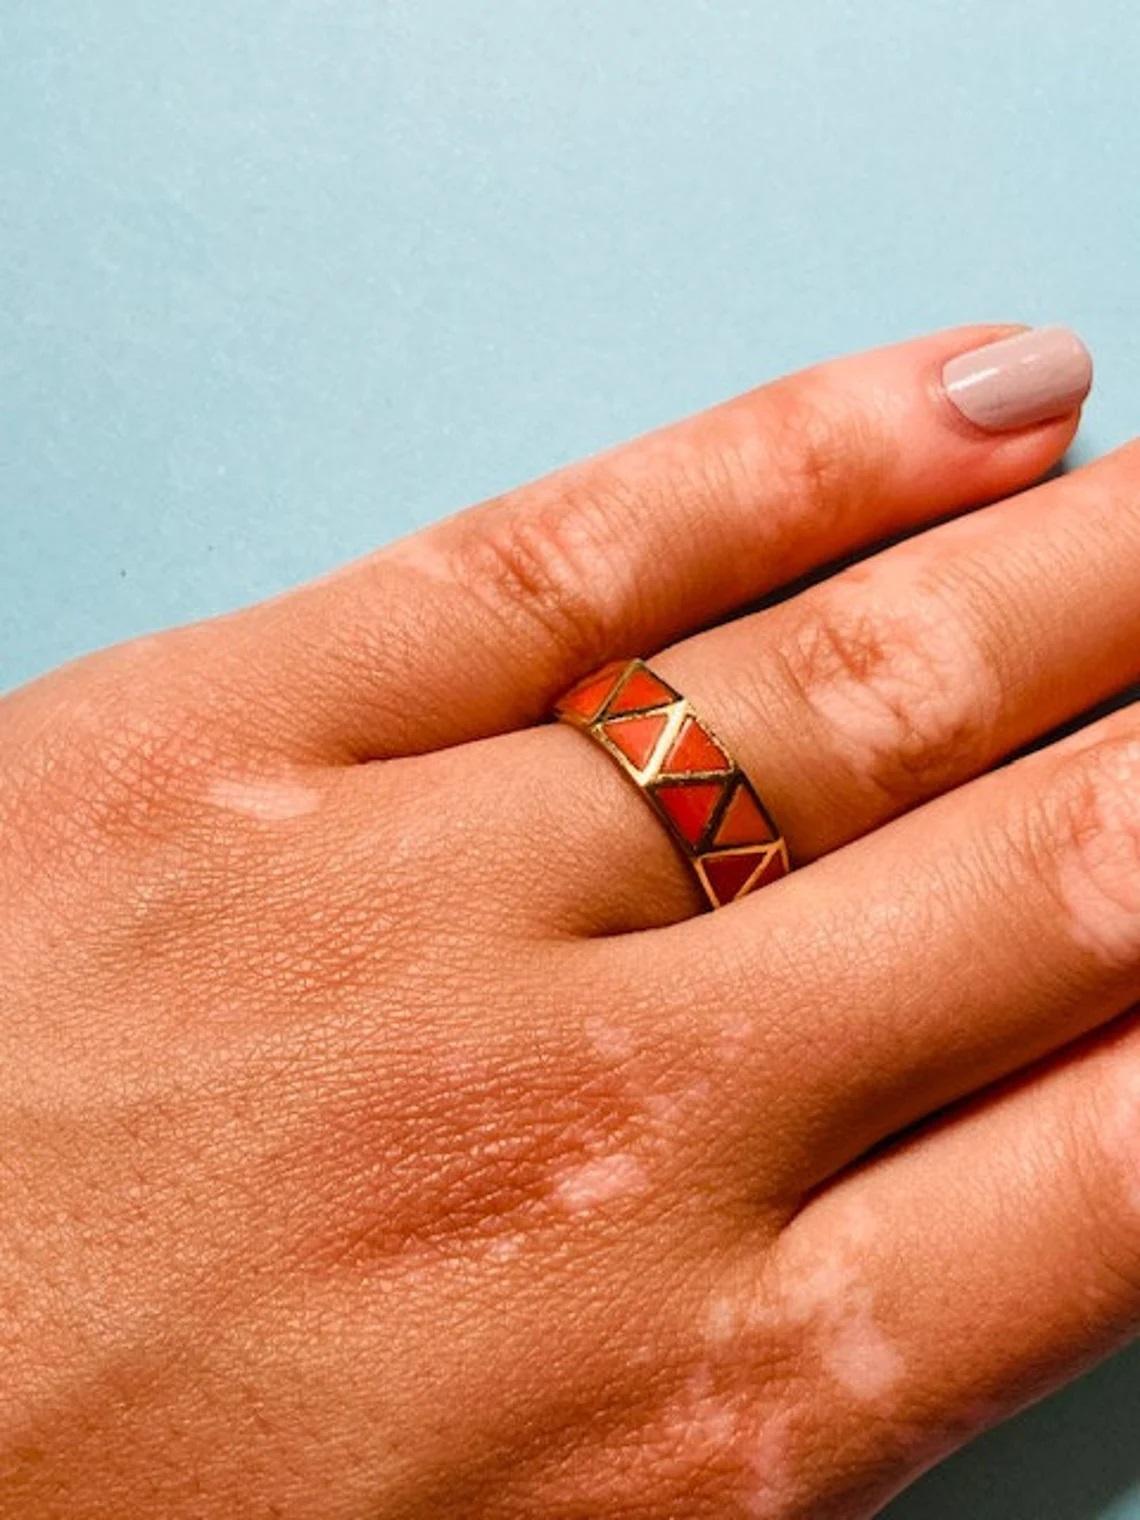 Vintage 18k Gold Coral Zig-Zag Ring Limited Edition, Size M UK/AU

This cool, vintage ring made of coral and 18k yellow gold is the perfect accompaniment to any look. It's geometric, mosaic-style pattern adds a splash of colour and is the ideal